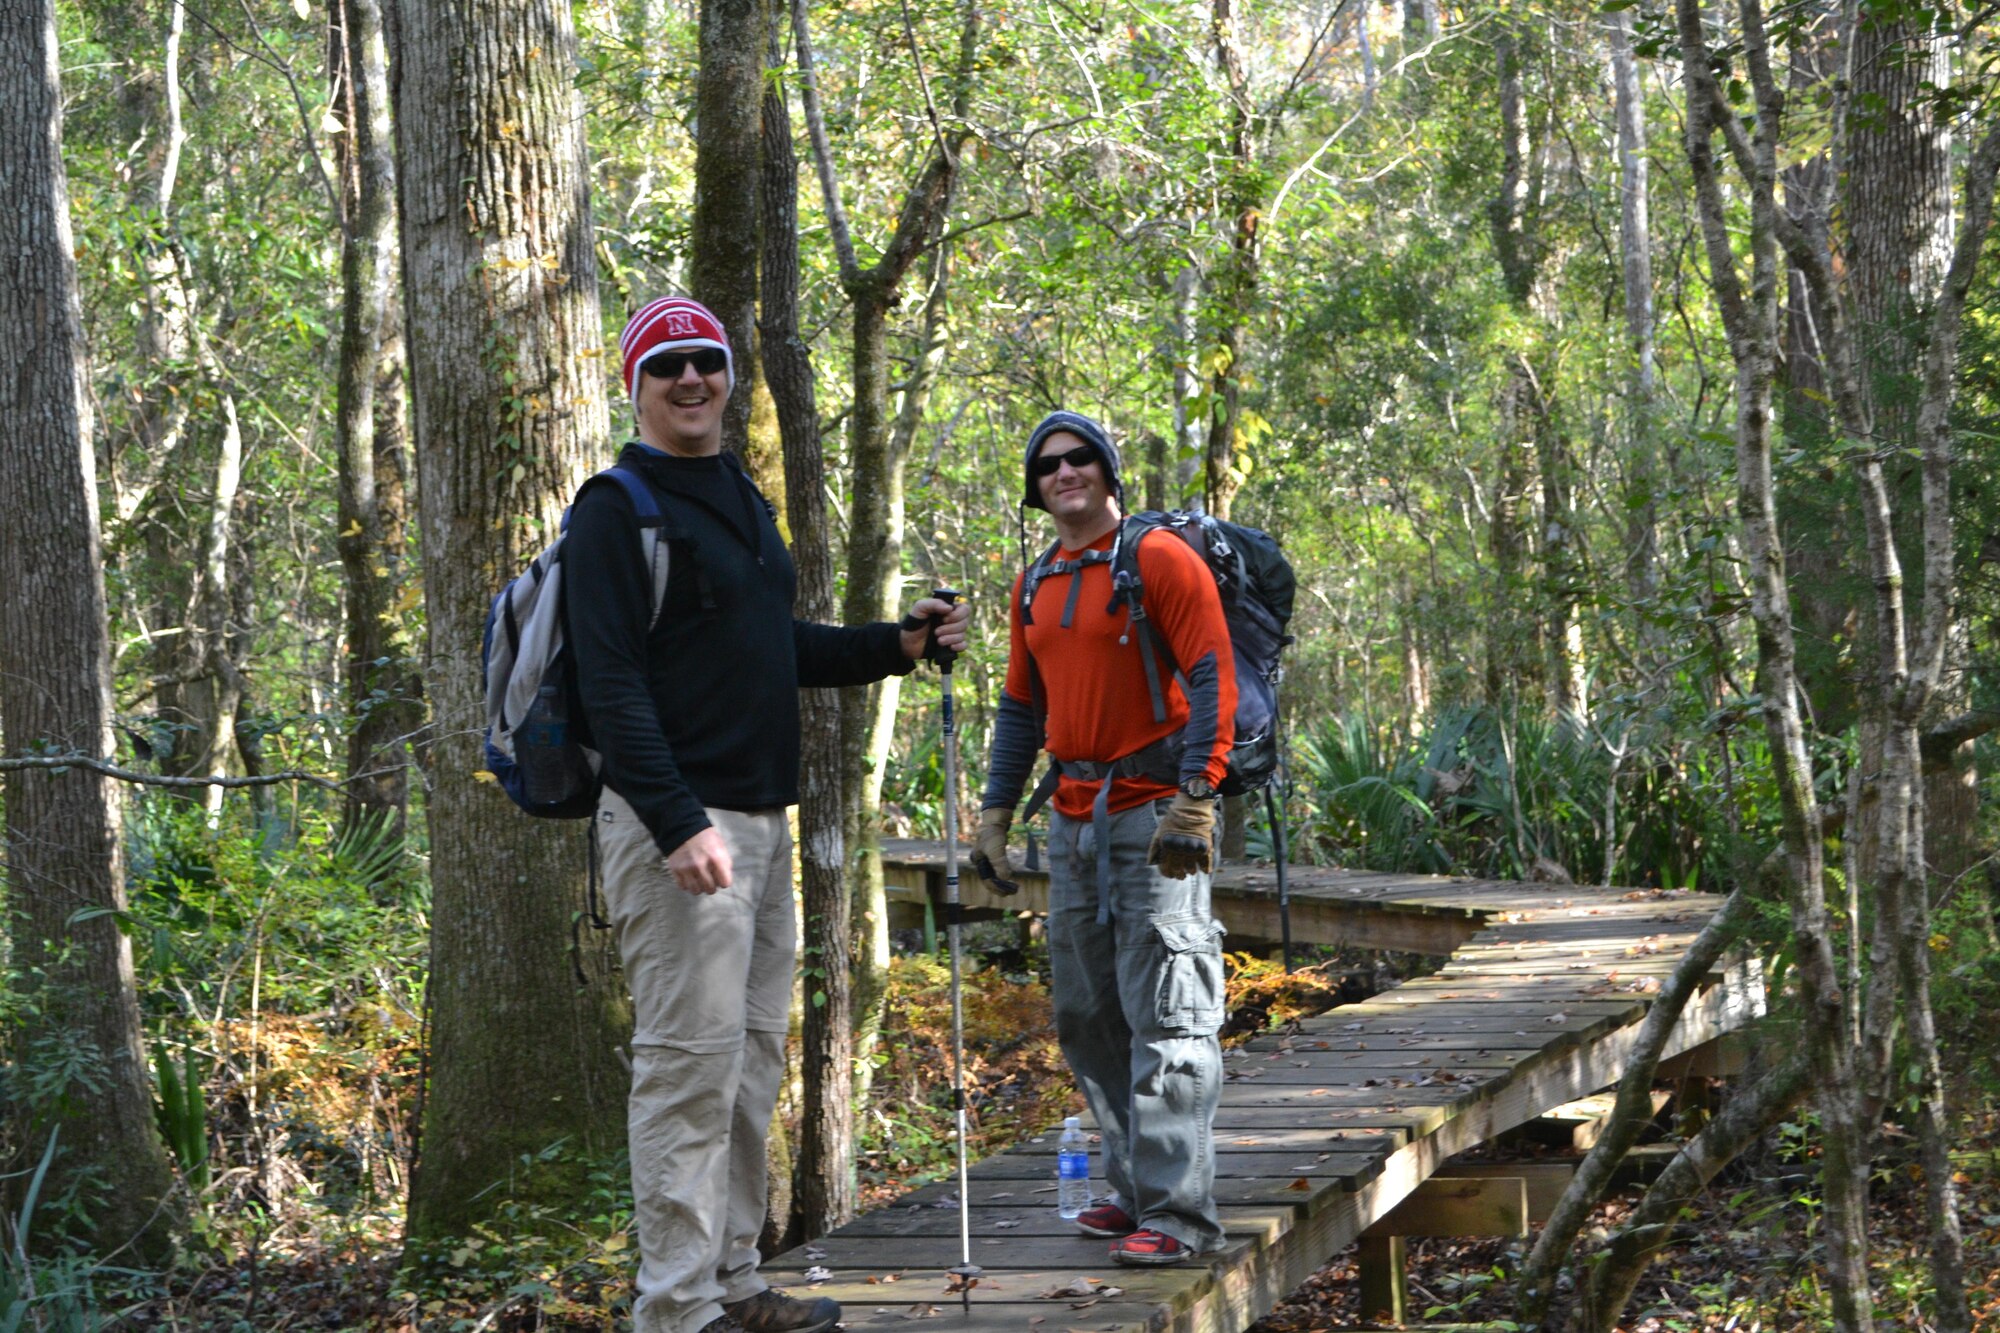 Tech. Sgt. Richard Egan (left), 4th Equipment Maintenance Squadron assistant chief for repair and reclamation, along with Master Sgt. Eric Leonard, 4th Aircraft Maintenance Squadron production superintendent, hike along the Neusiok Trail, November 15, 2014, in the Croatan National Forest, North Carolina. The club chose a six-and-a-half mile trail as the first official hike the club completed. (Courtesy photo)